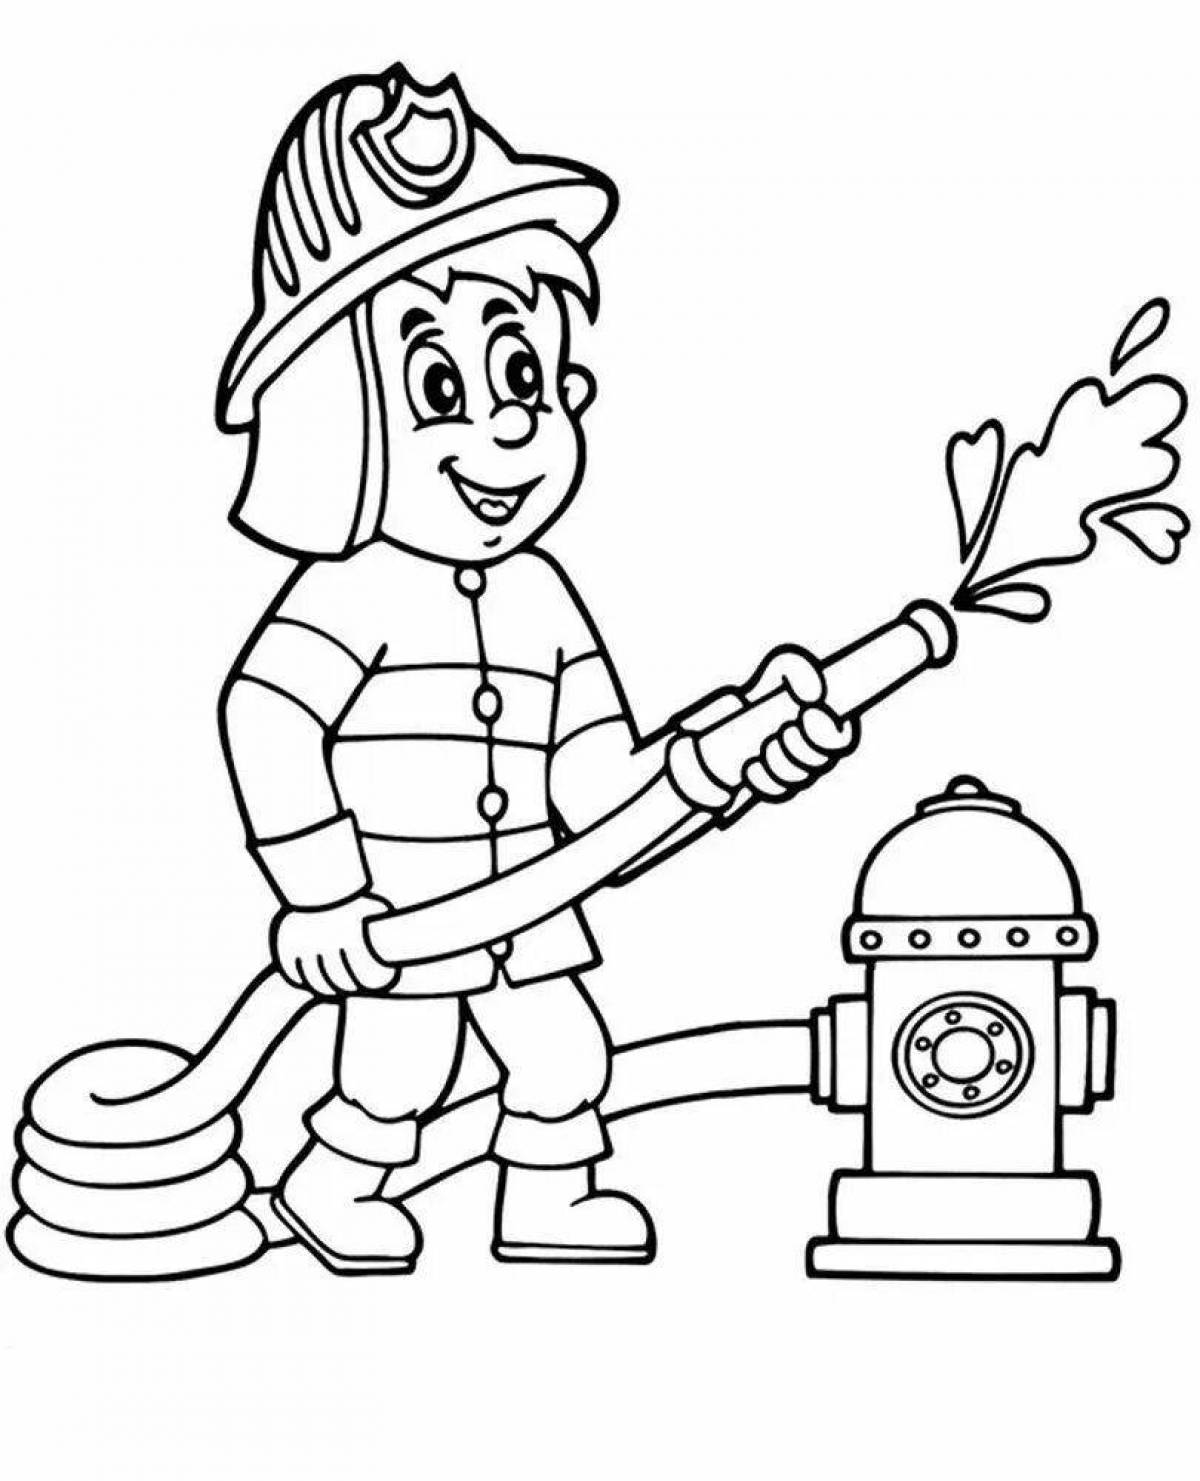 Creative fireman coloring book for kids